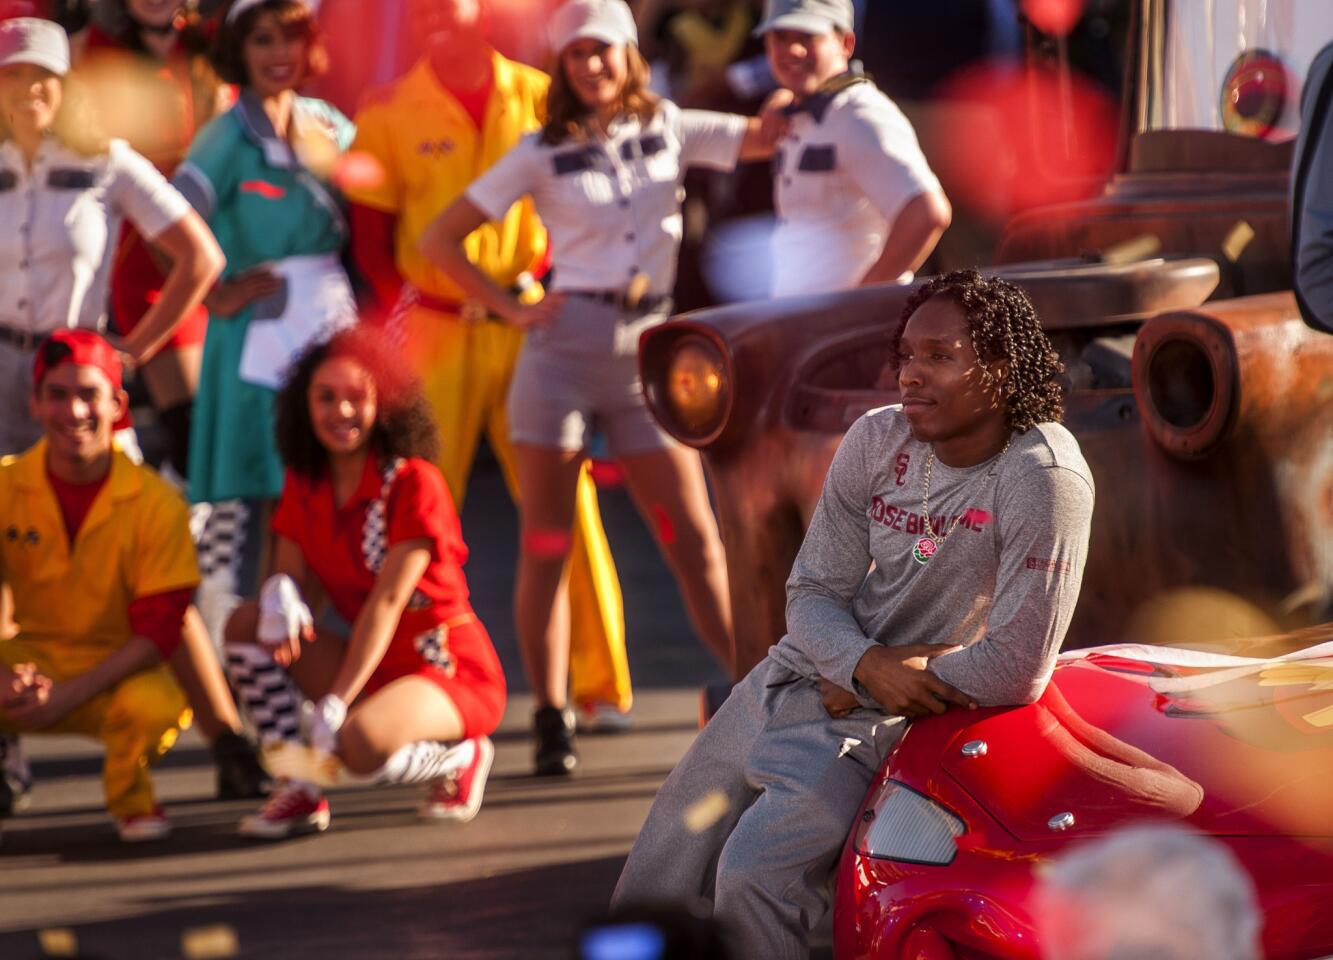 Southern California's Adoree Jackson strikes a pose at Disney California Adventure in Anaheim, Calif., on Tuesday, Dec. 27, 2016. USC plays Penn State in the Rose Bowl NCAA college football game Monday. (Paul Rodriguez/The Orange County Register via AP)